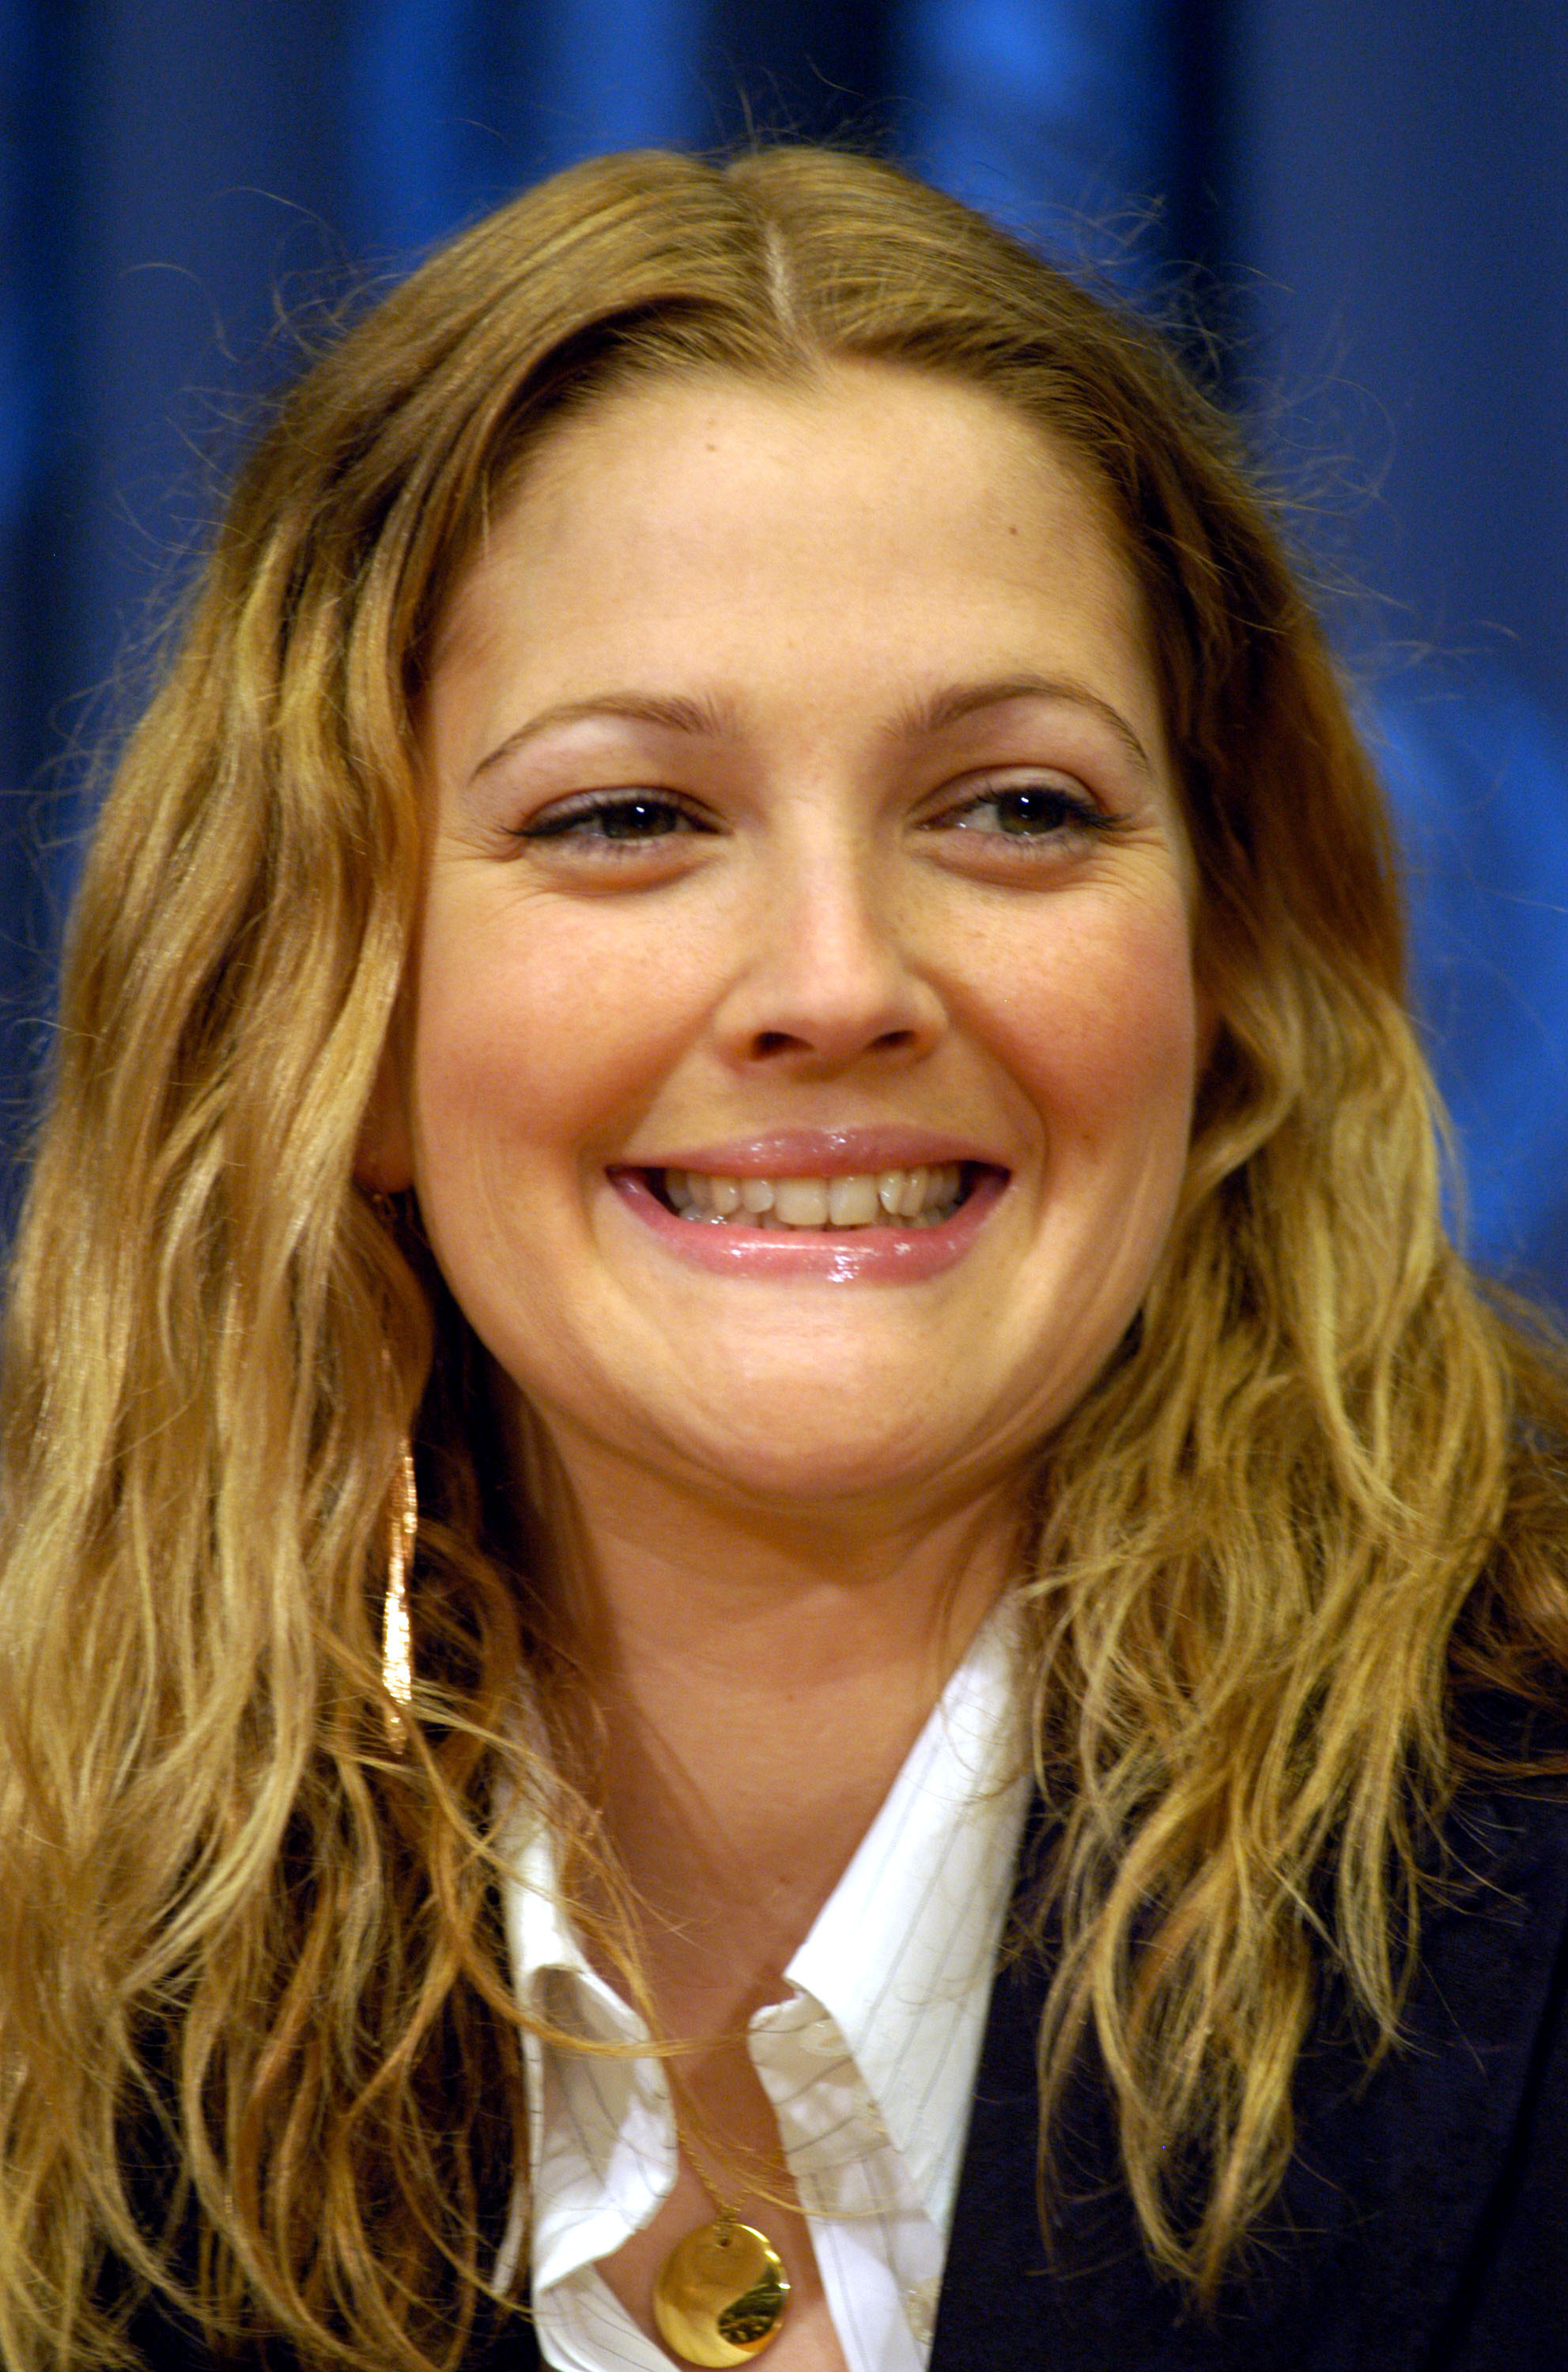 Drew Barrymore on February 5, 2004. | Source: Getty Images